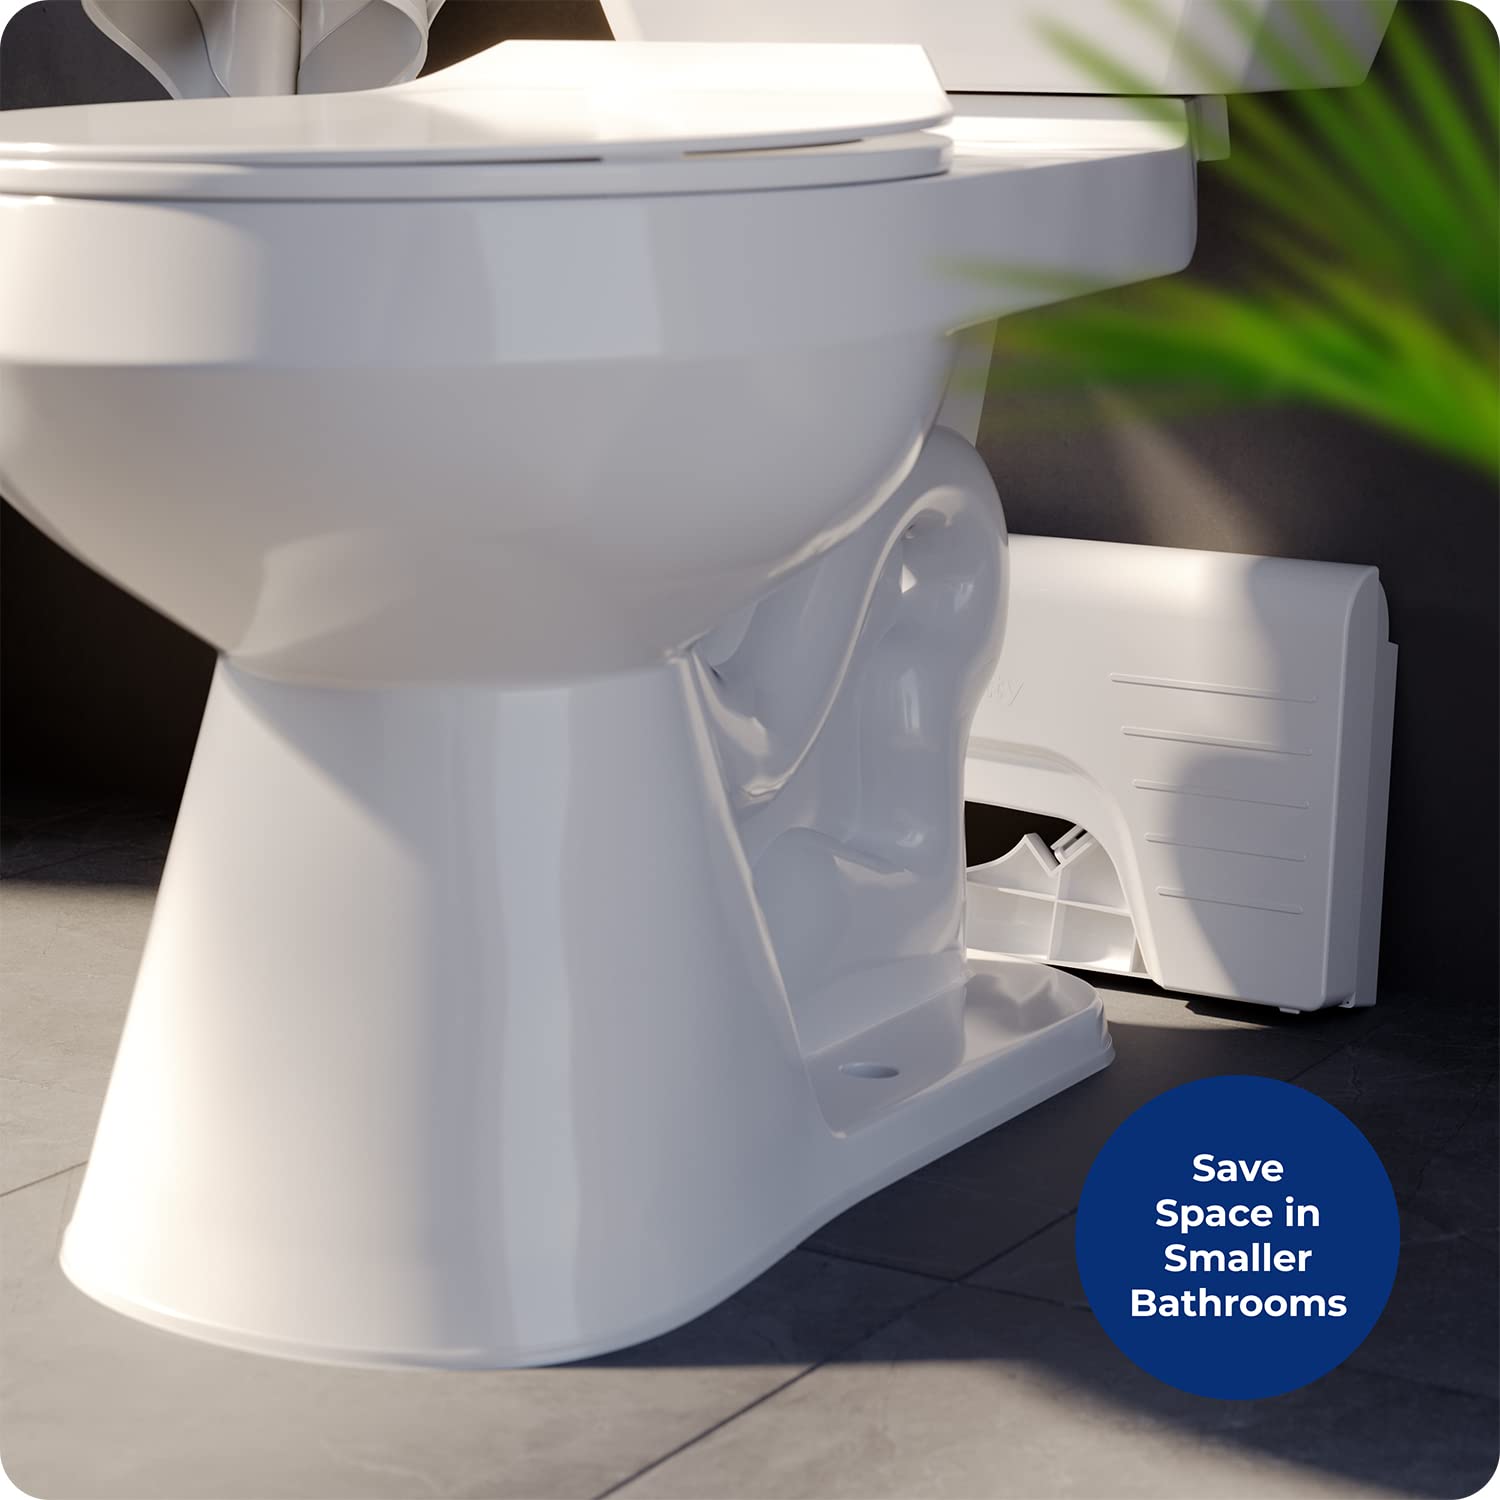 Squatty Potty Fold N Stow Compact Foldable Toilet Stool, White, 7